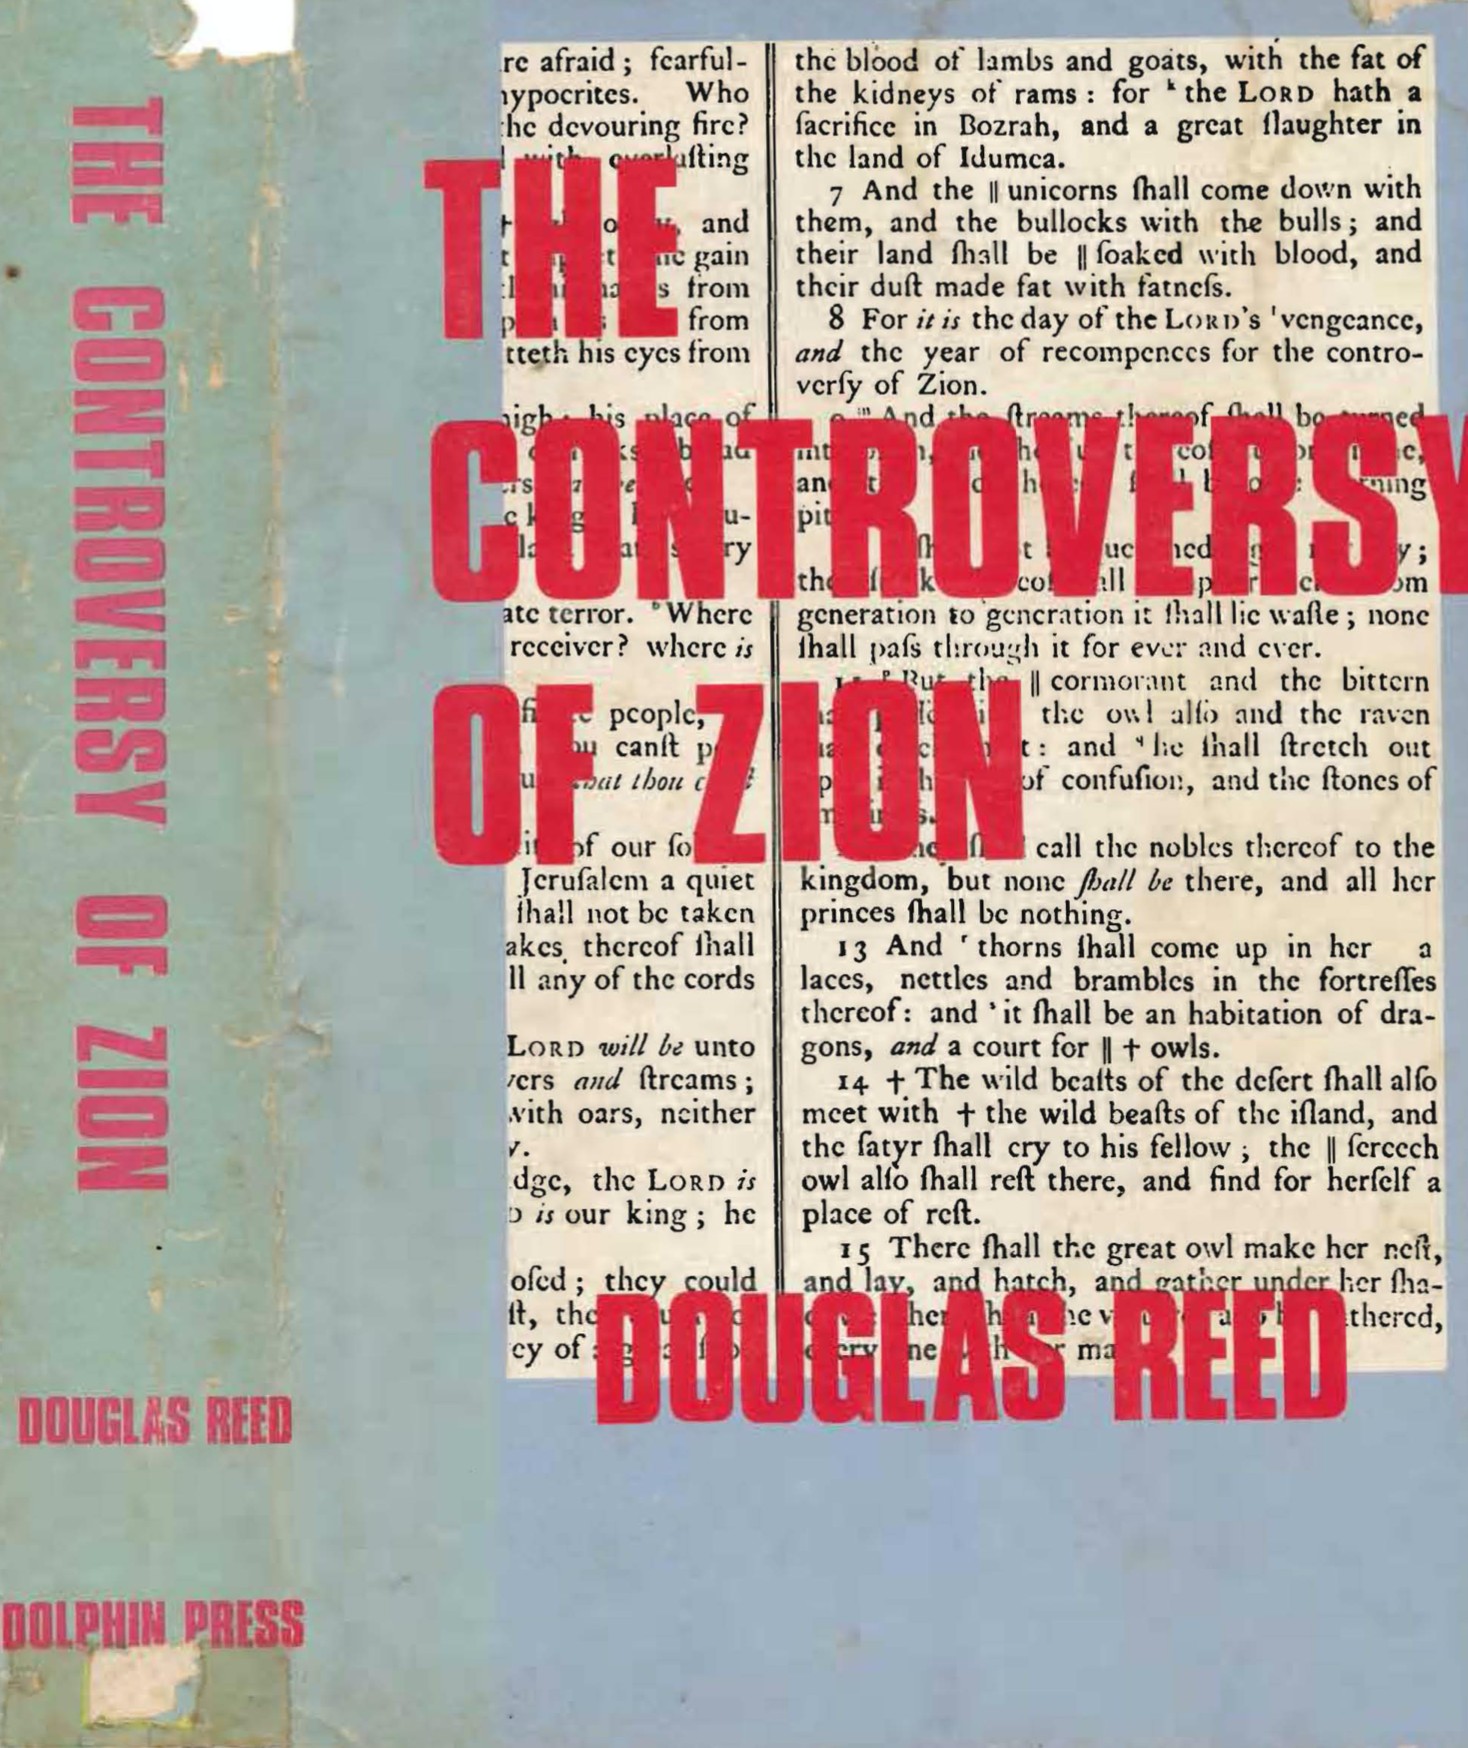 The Controversy of Zion (1978) by Douglas Reed